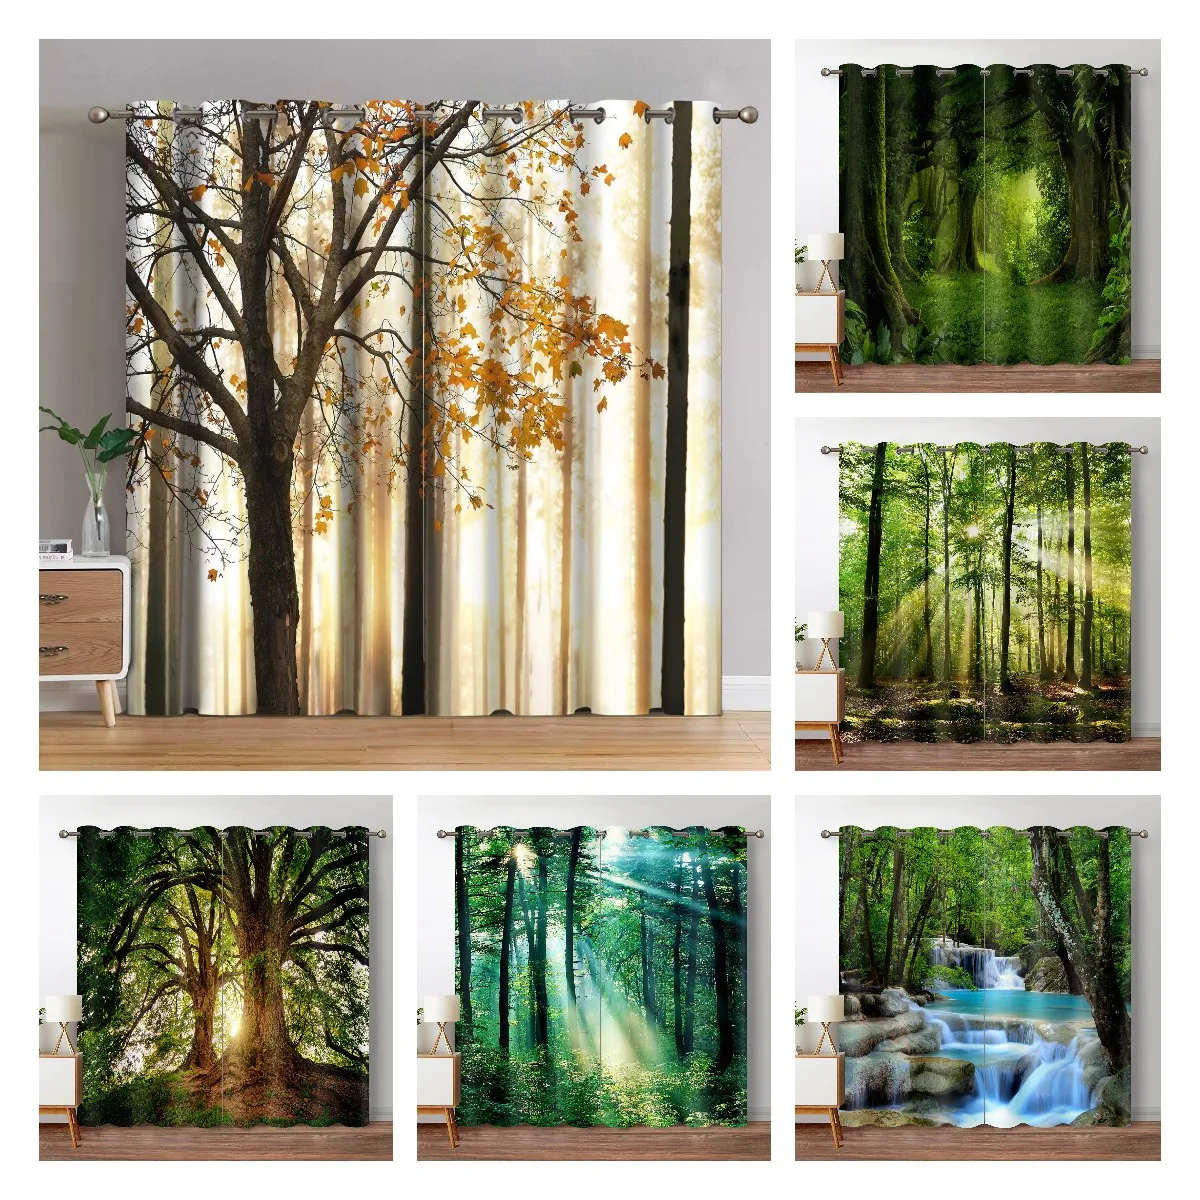 

Forest Blackout Curtains Jungle Tree Nature Scenery Window Curtain Living Room Bedroom Waterfall Left and Right Biparting Open